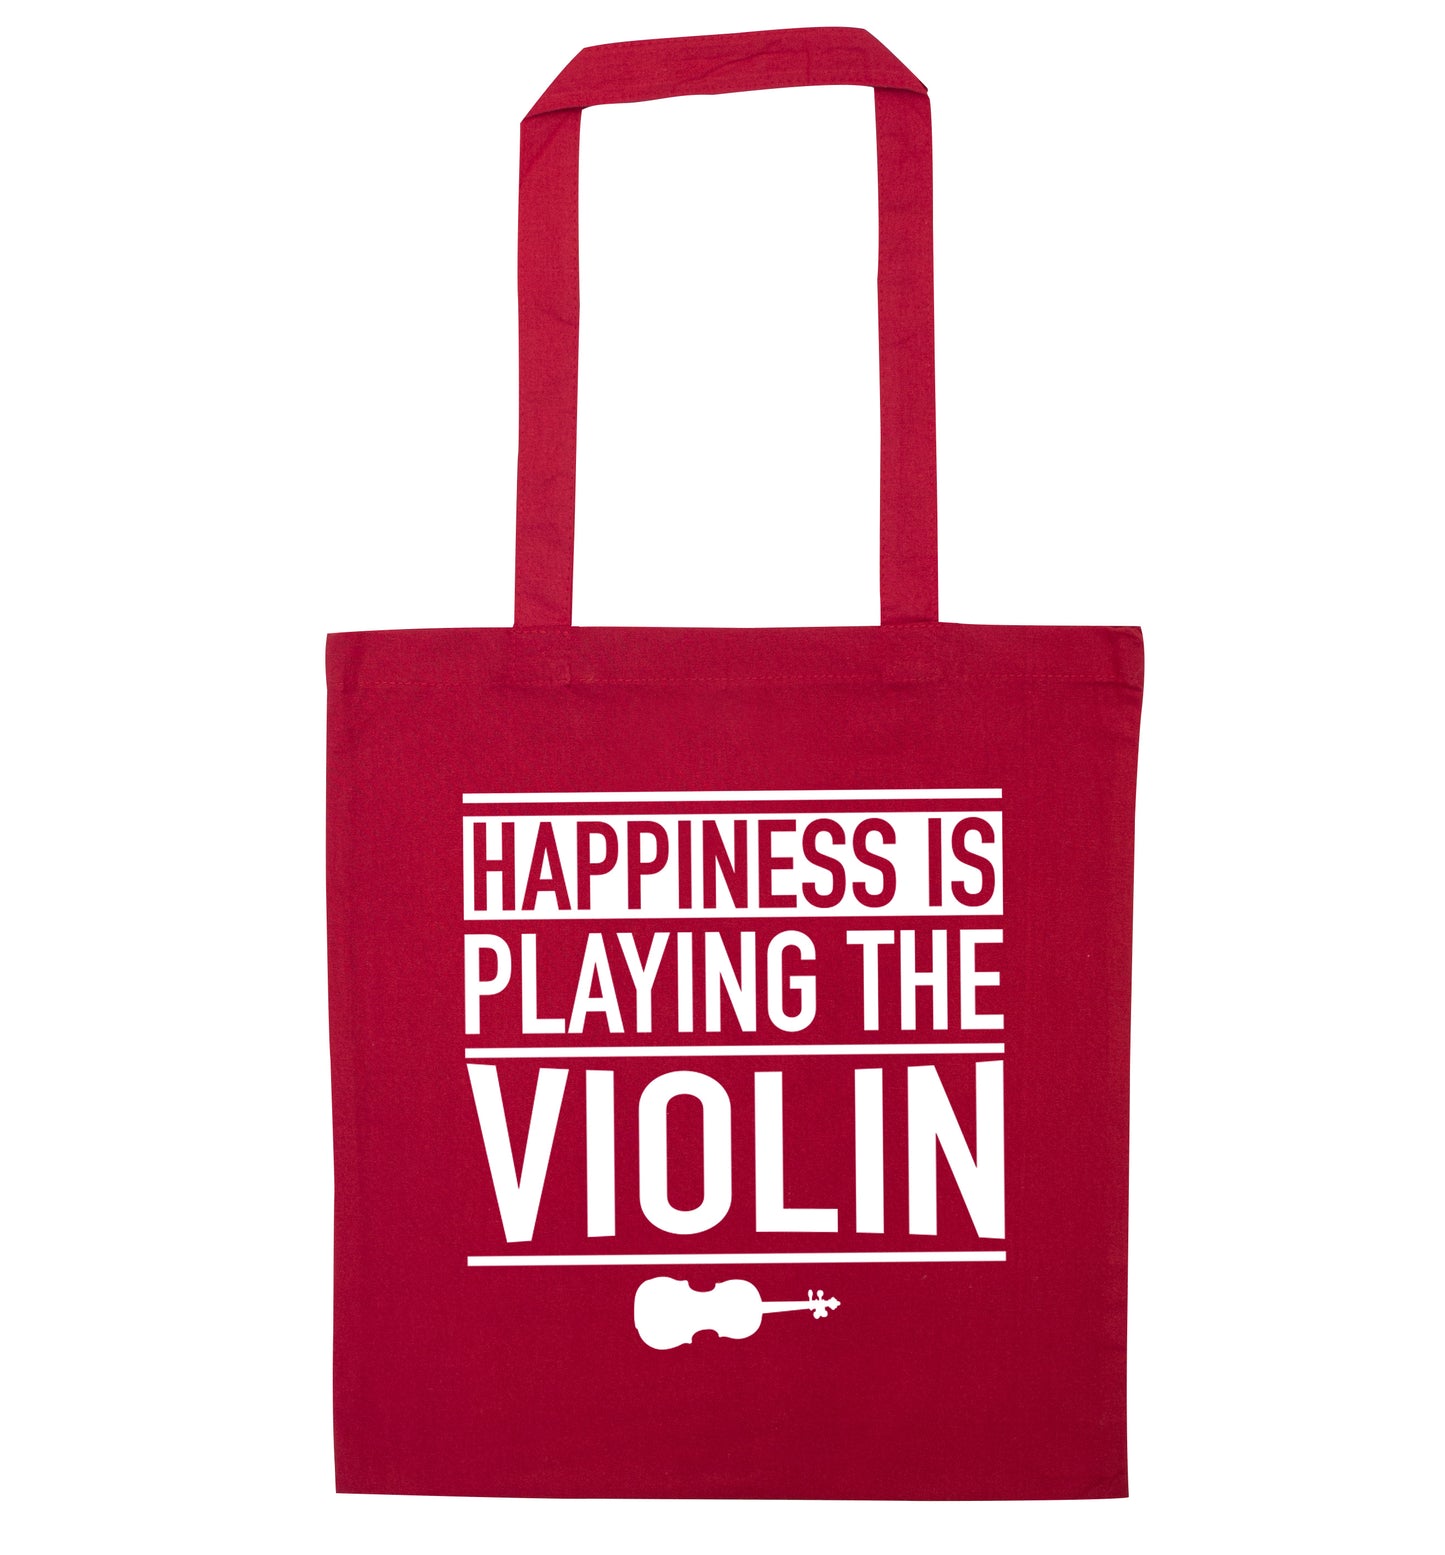 Happiness is playing the violin red tote bag